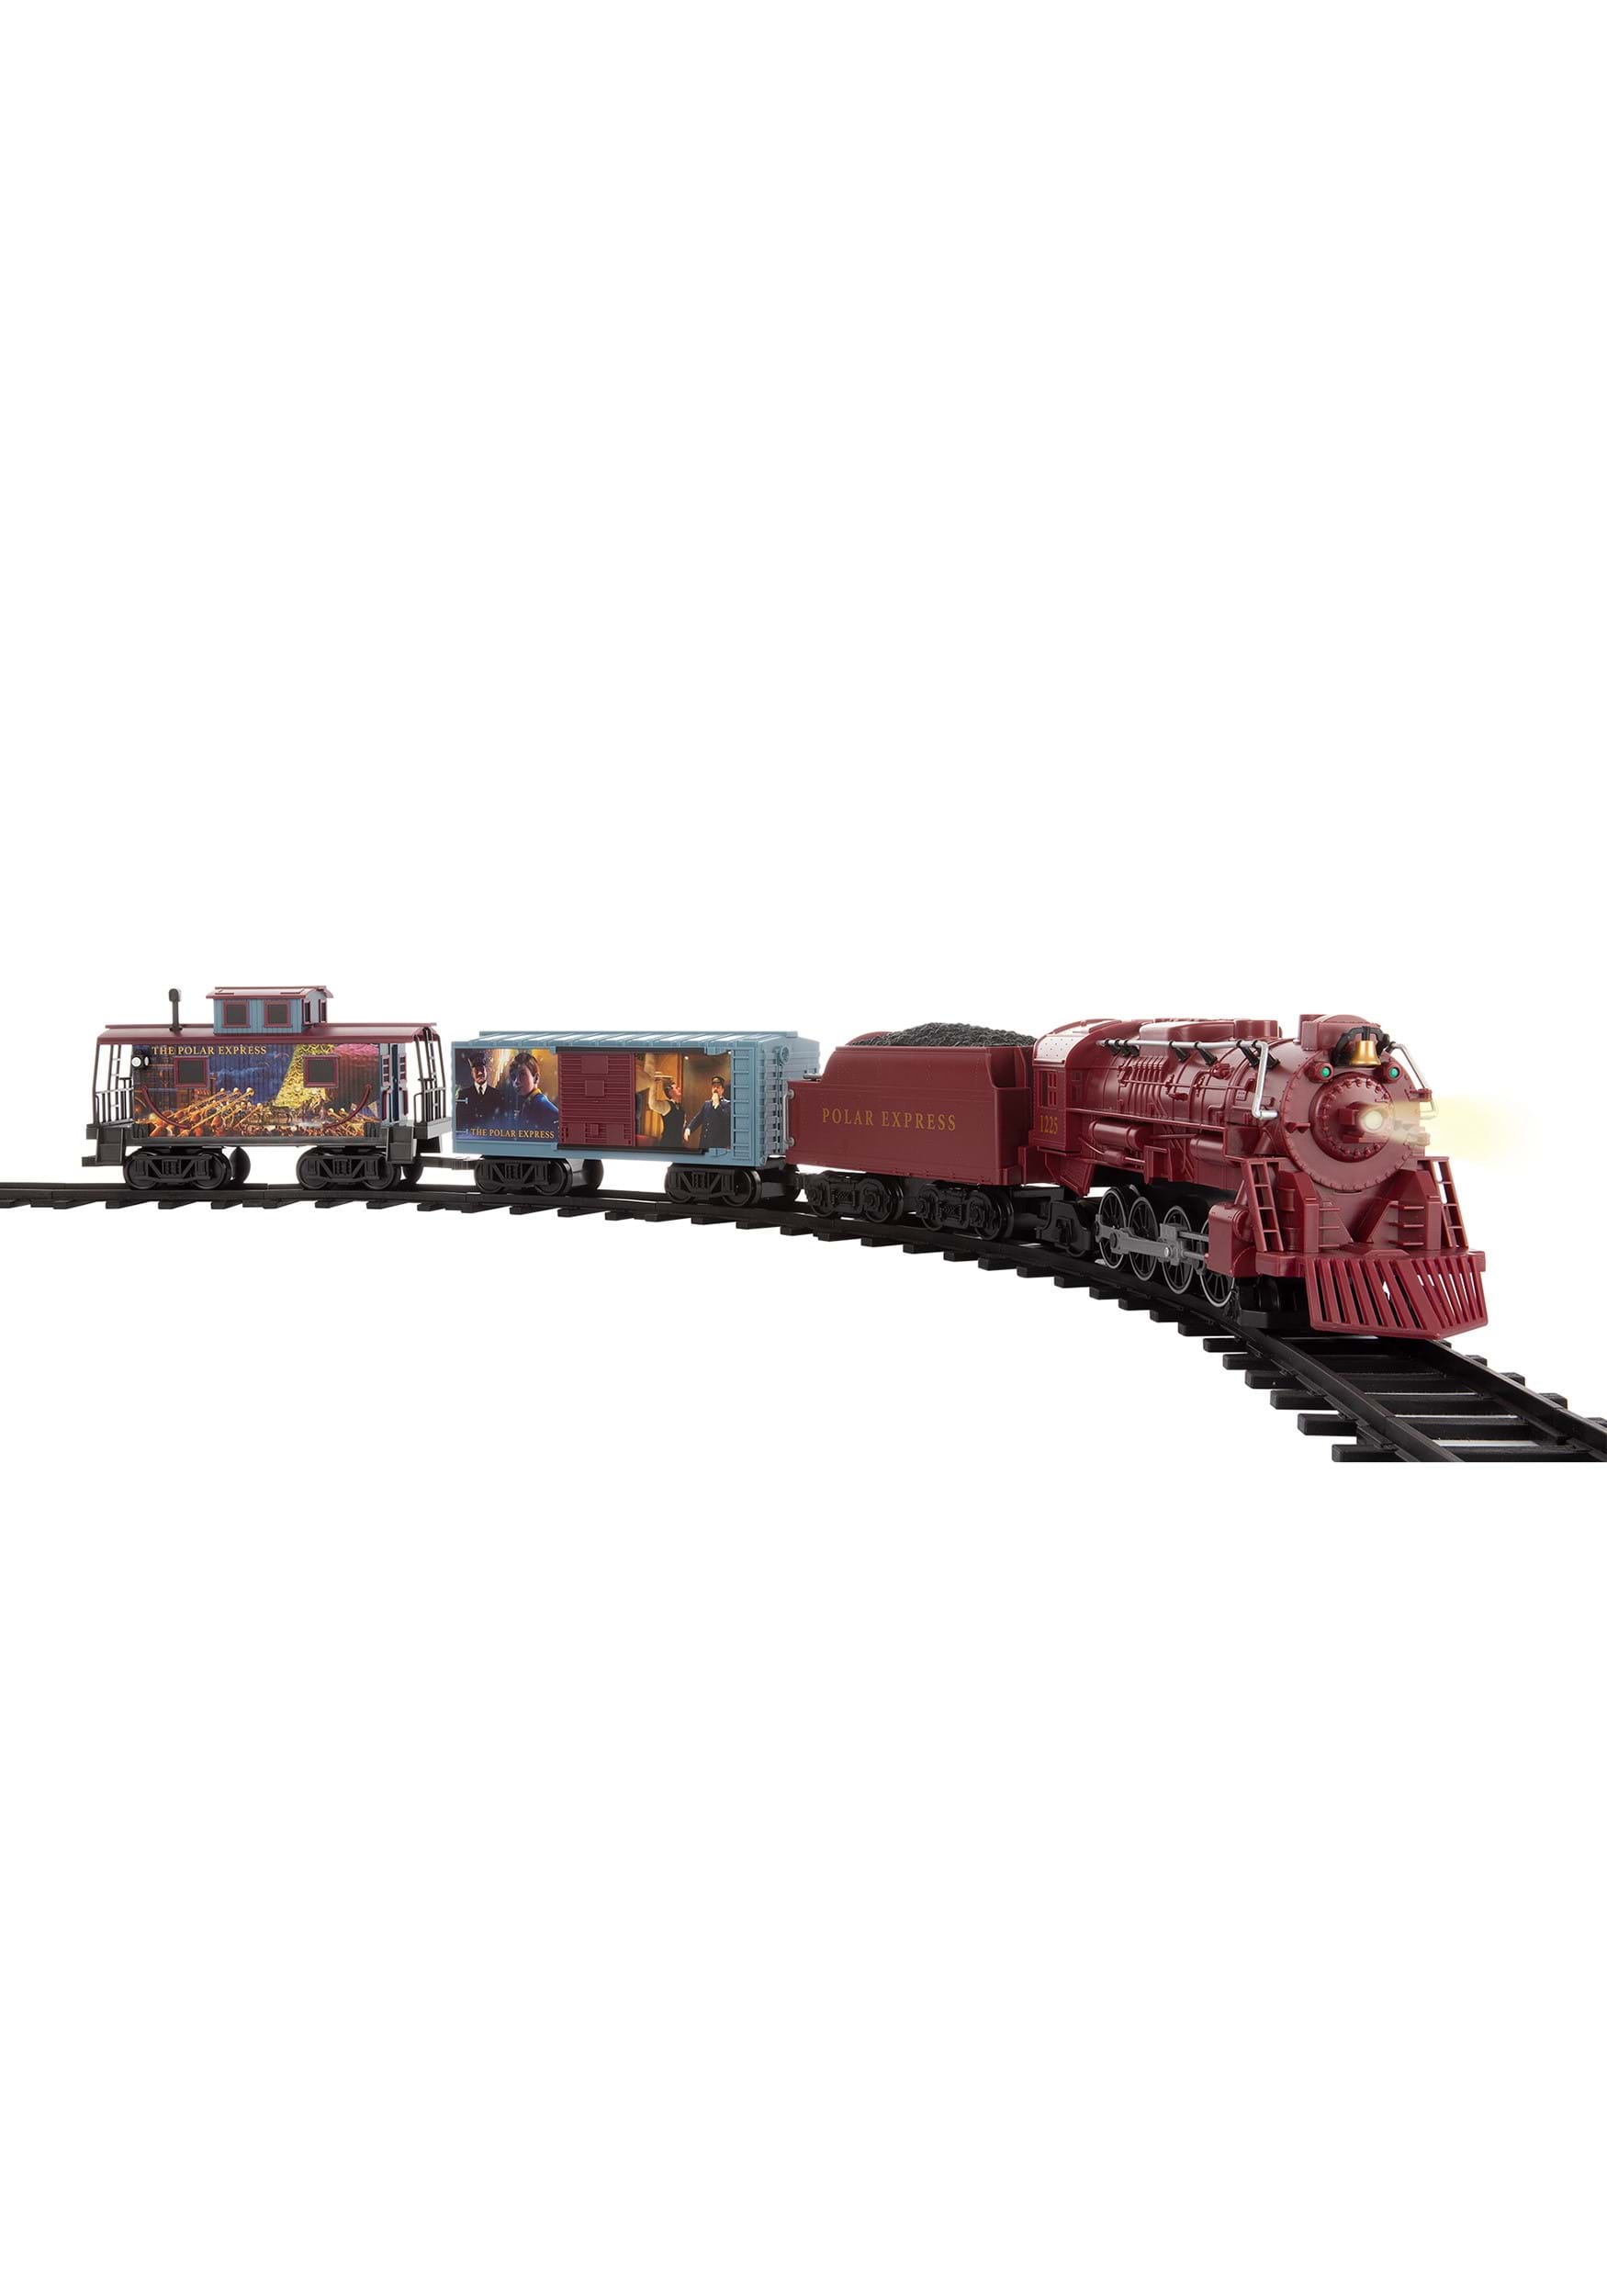 Lionel Polar Express Freight Ready to Play Train Set Toy